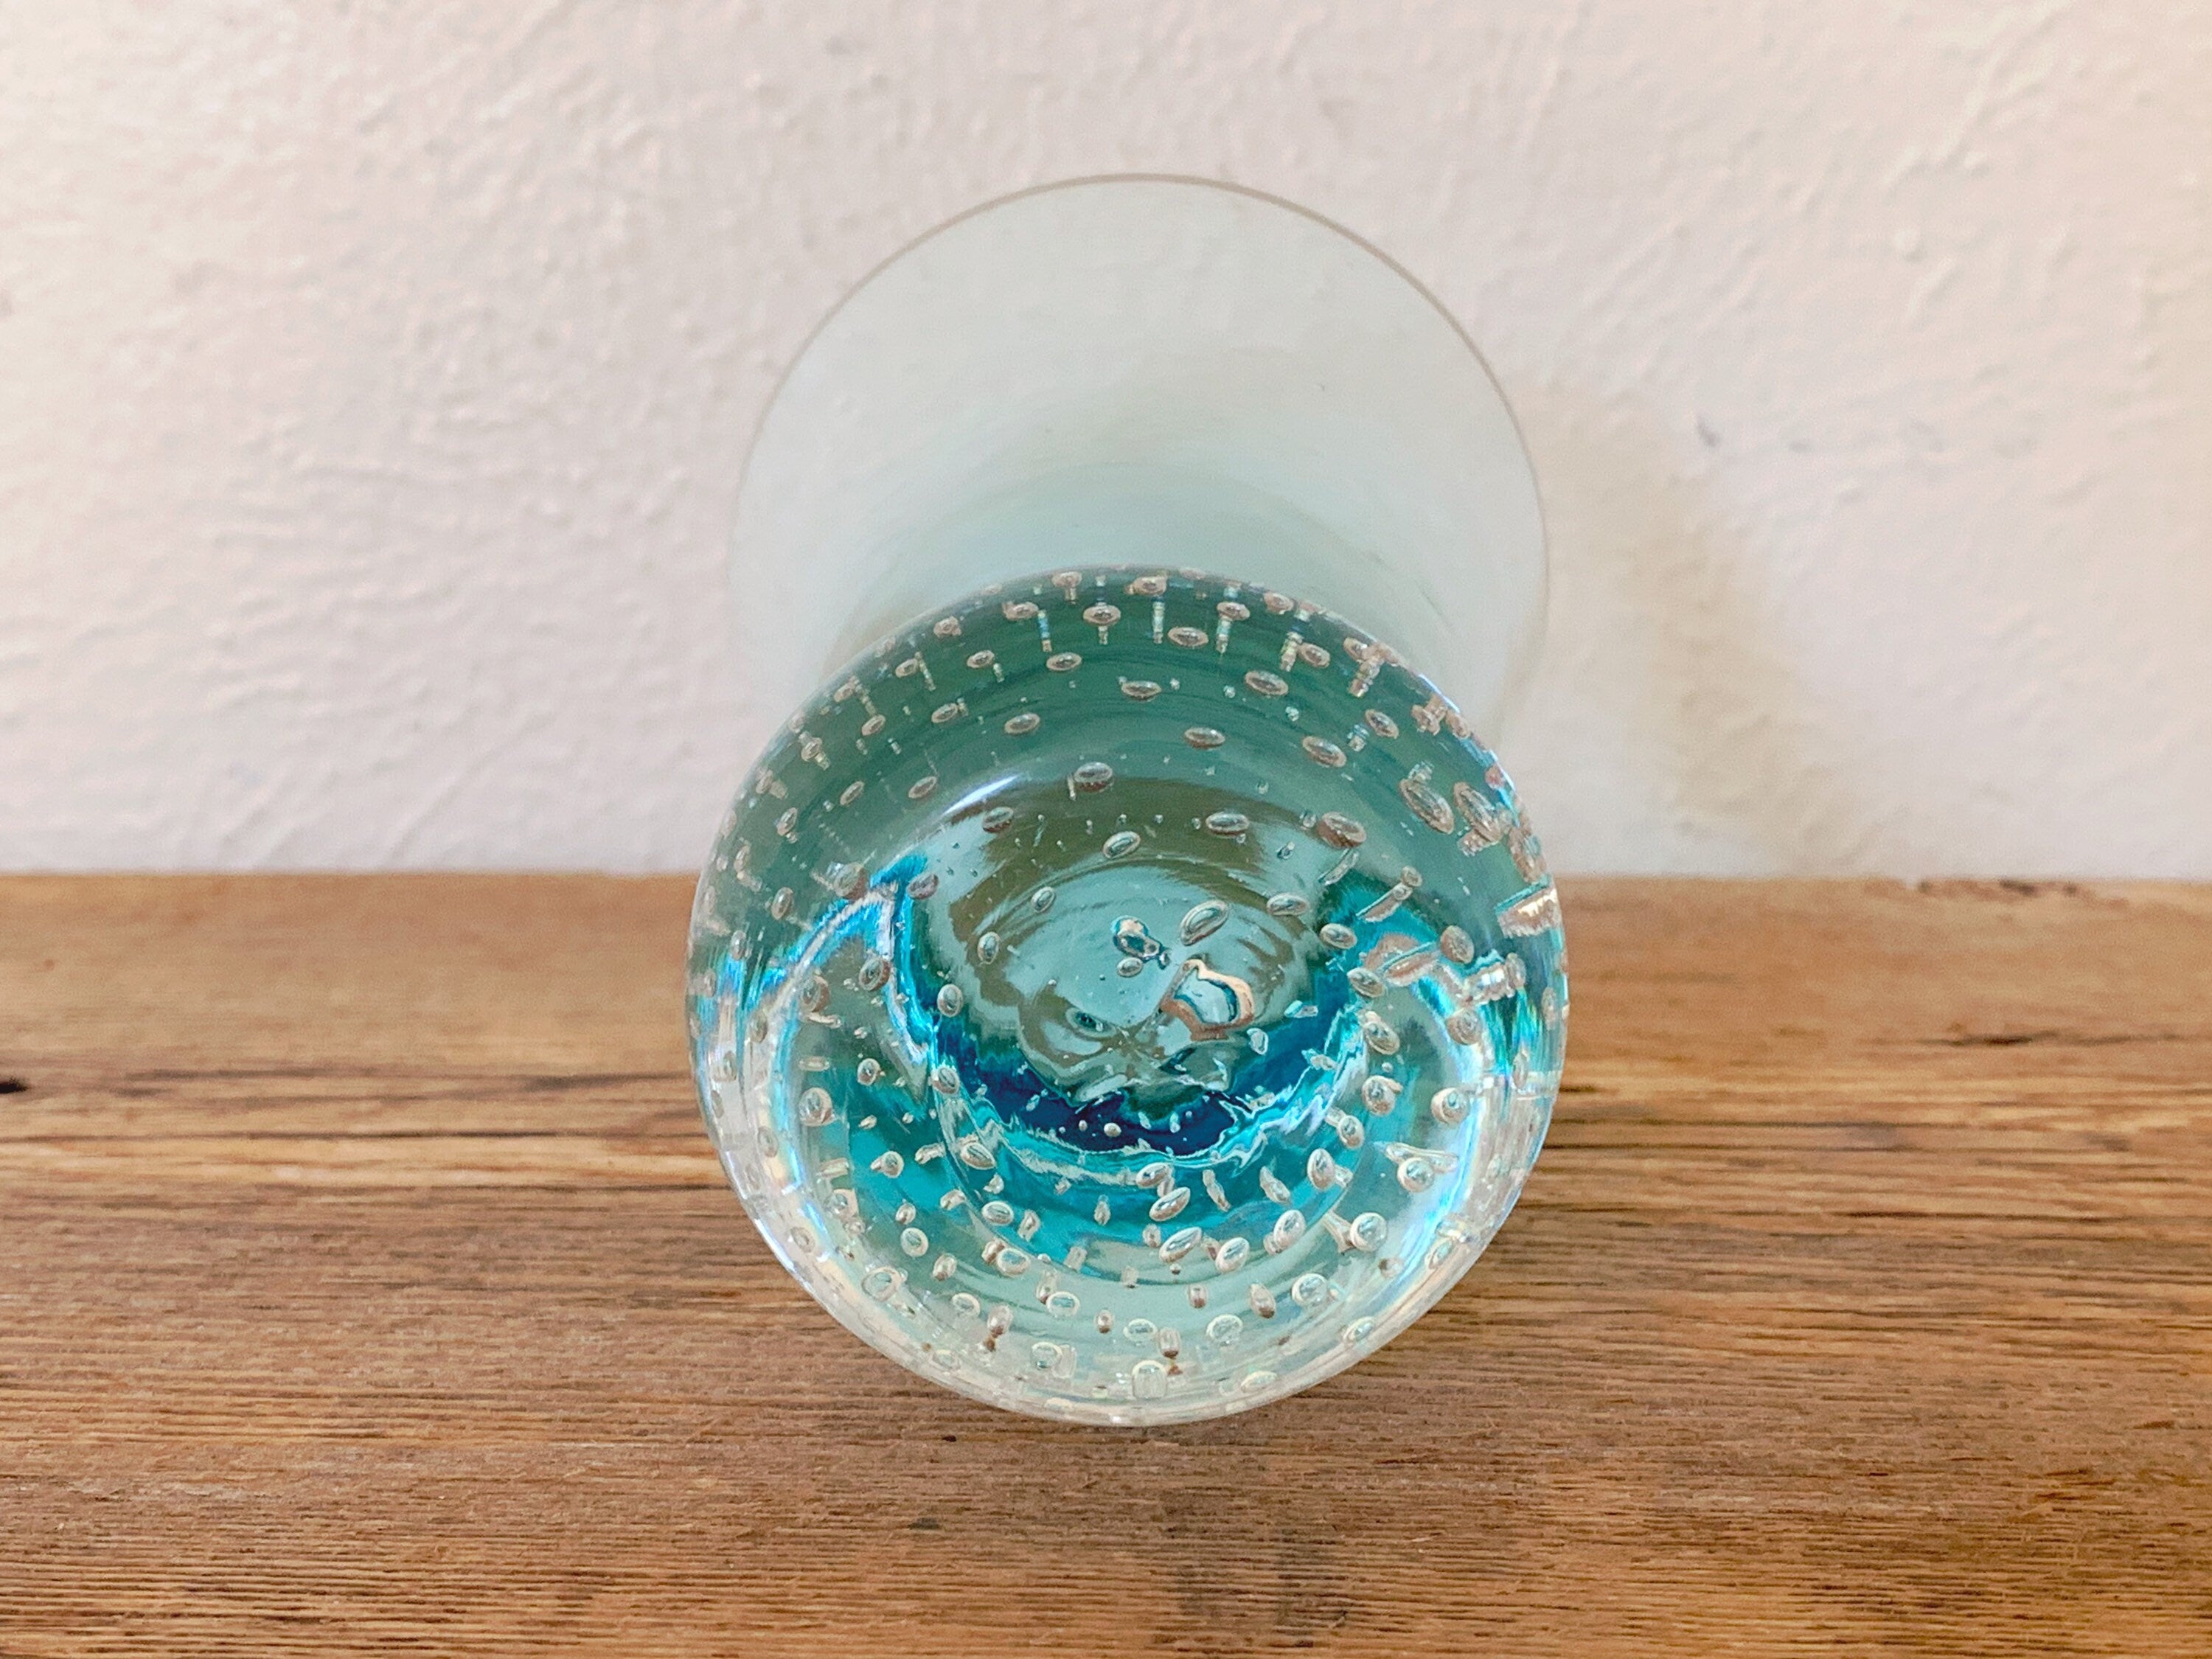 Pair of Vintage Bubble Ball Base Colored Wine Glasses in Green and Blue | Hand Blown Art Glass Barware | Gift for Her | Housewarming Gift